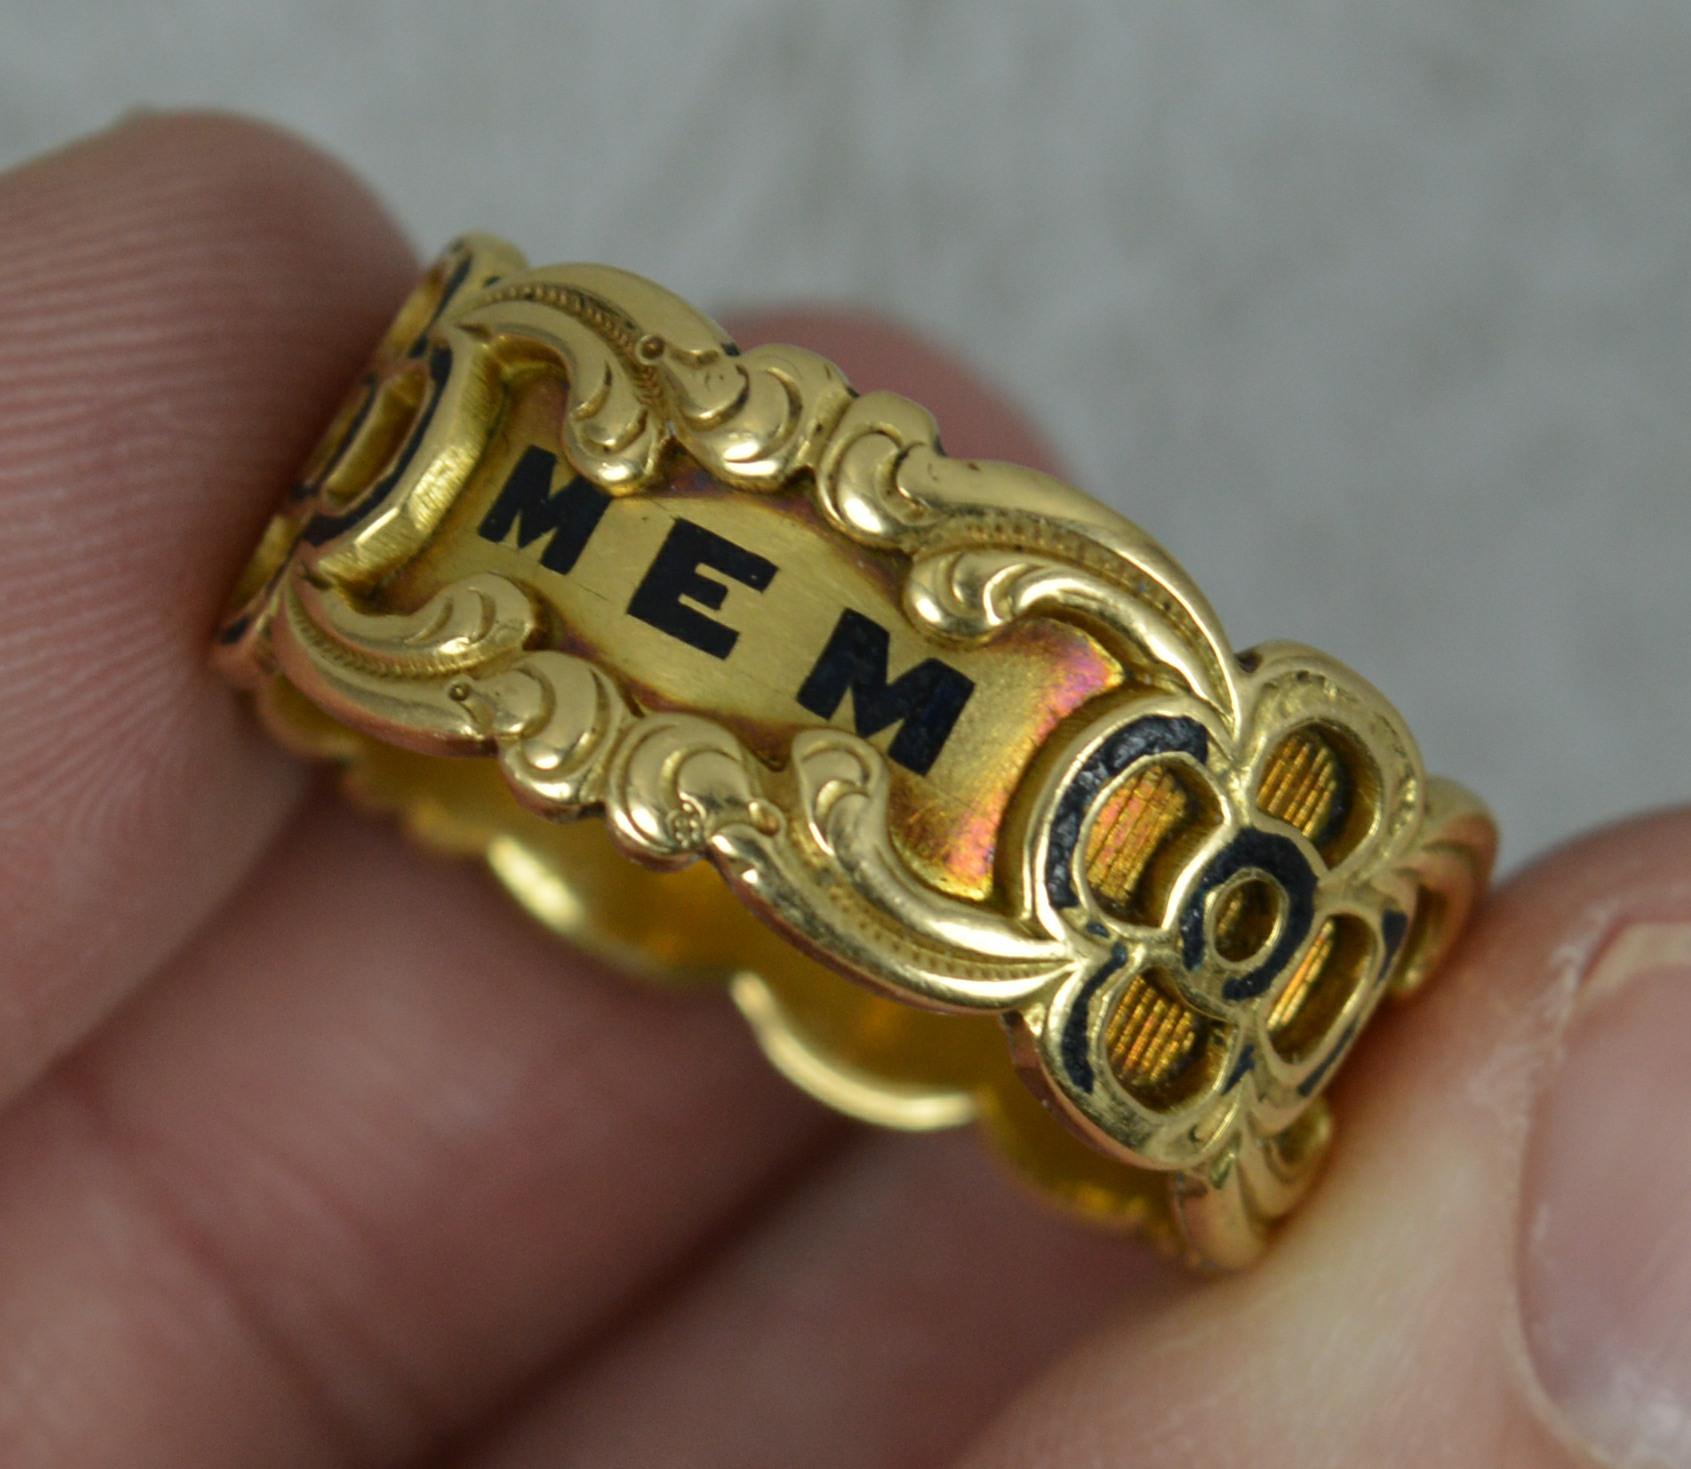 1842 Victorian 18 Carat Gold Enamel In Memory of Mourning Band Ring 3